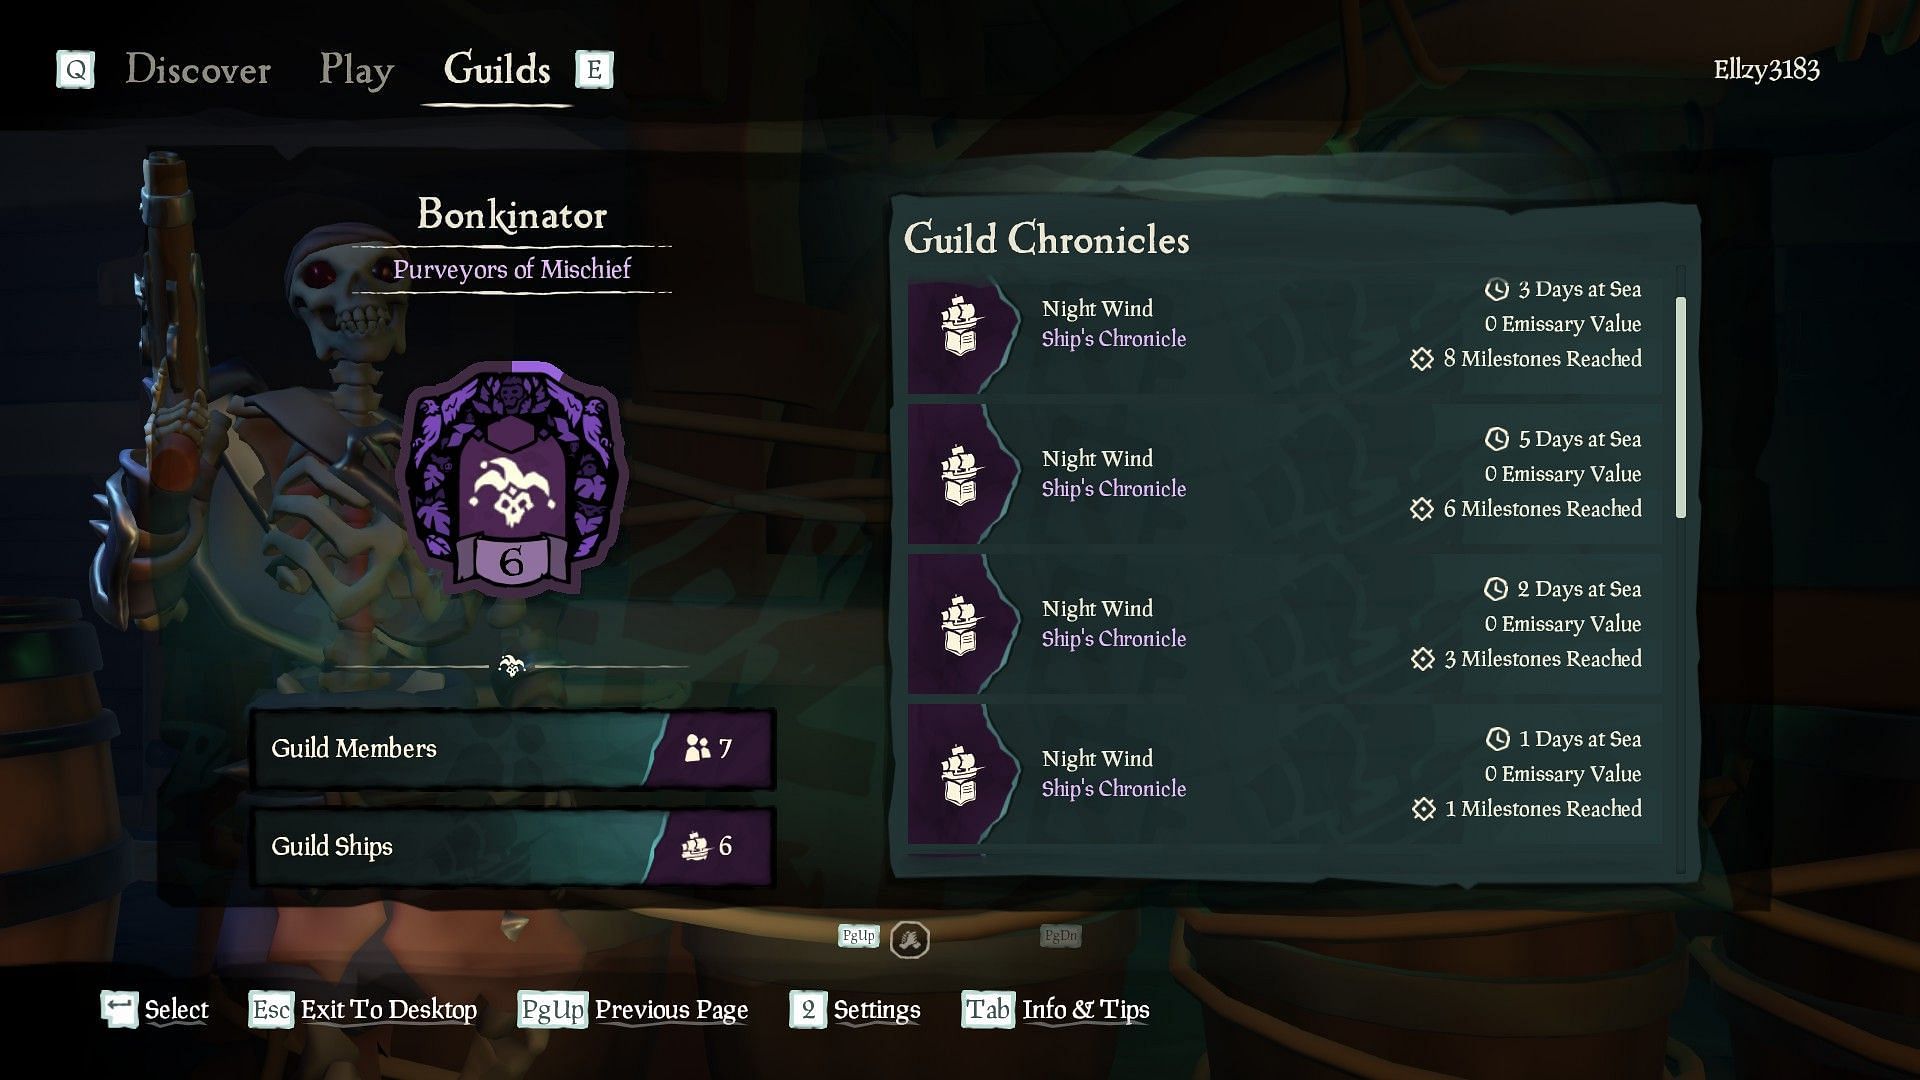 The guild system allows players to sail as part of a guild emissary and earn reputation (Image via Rare)